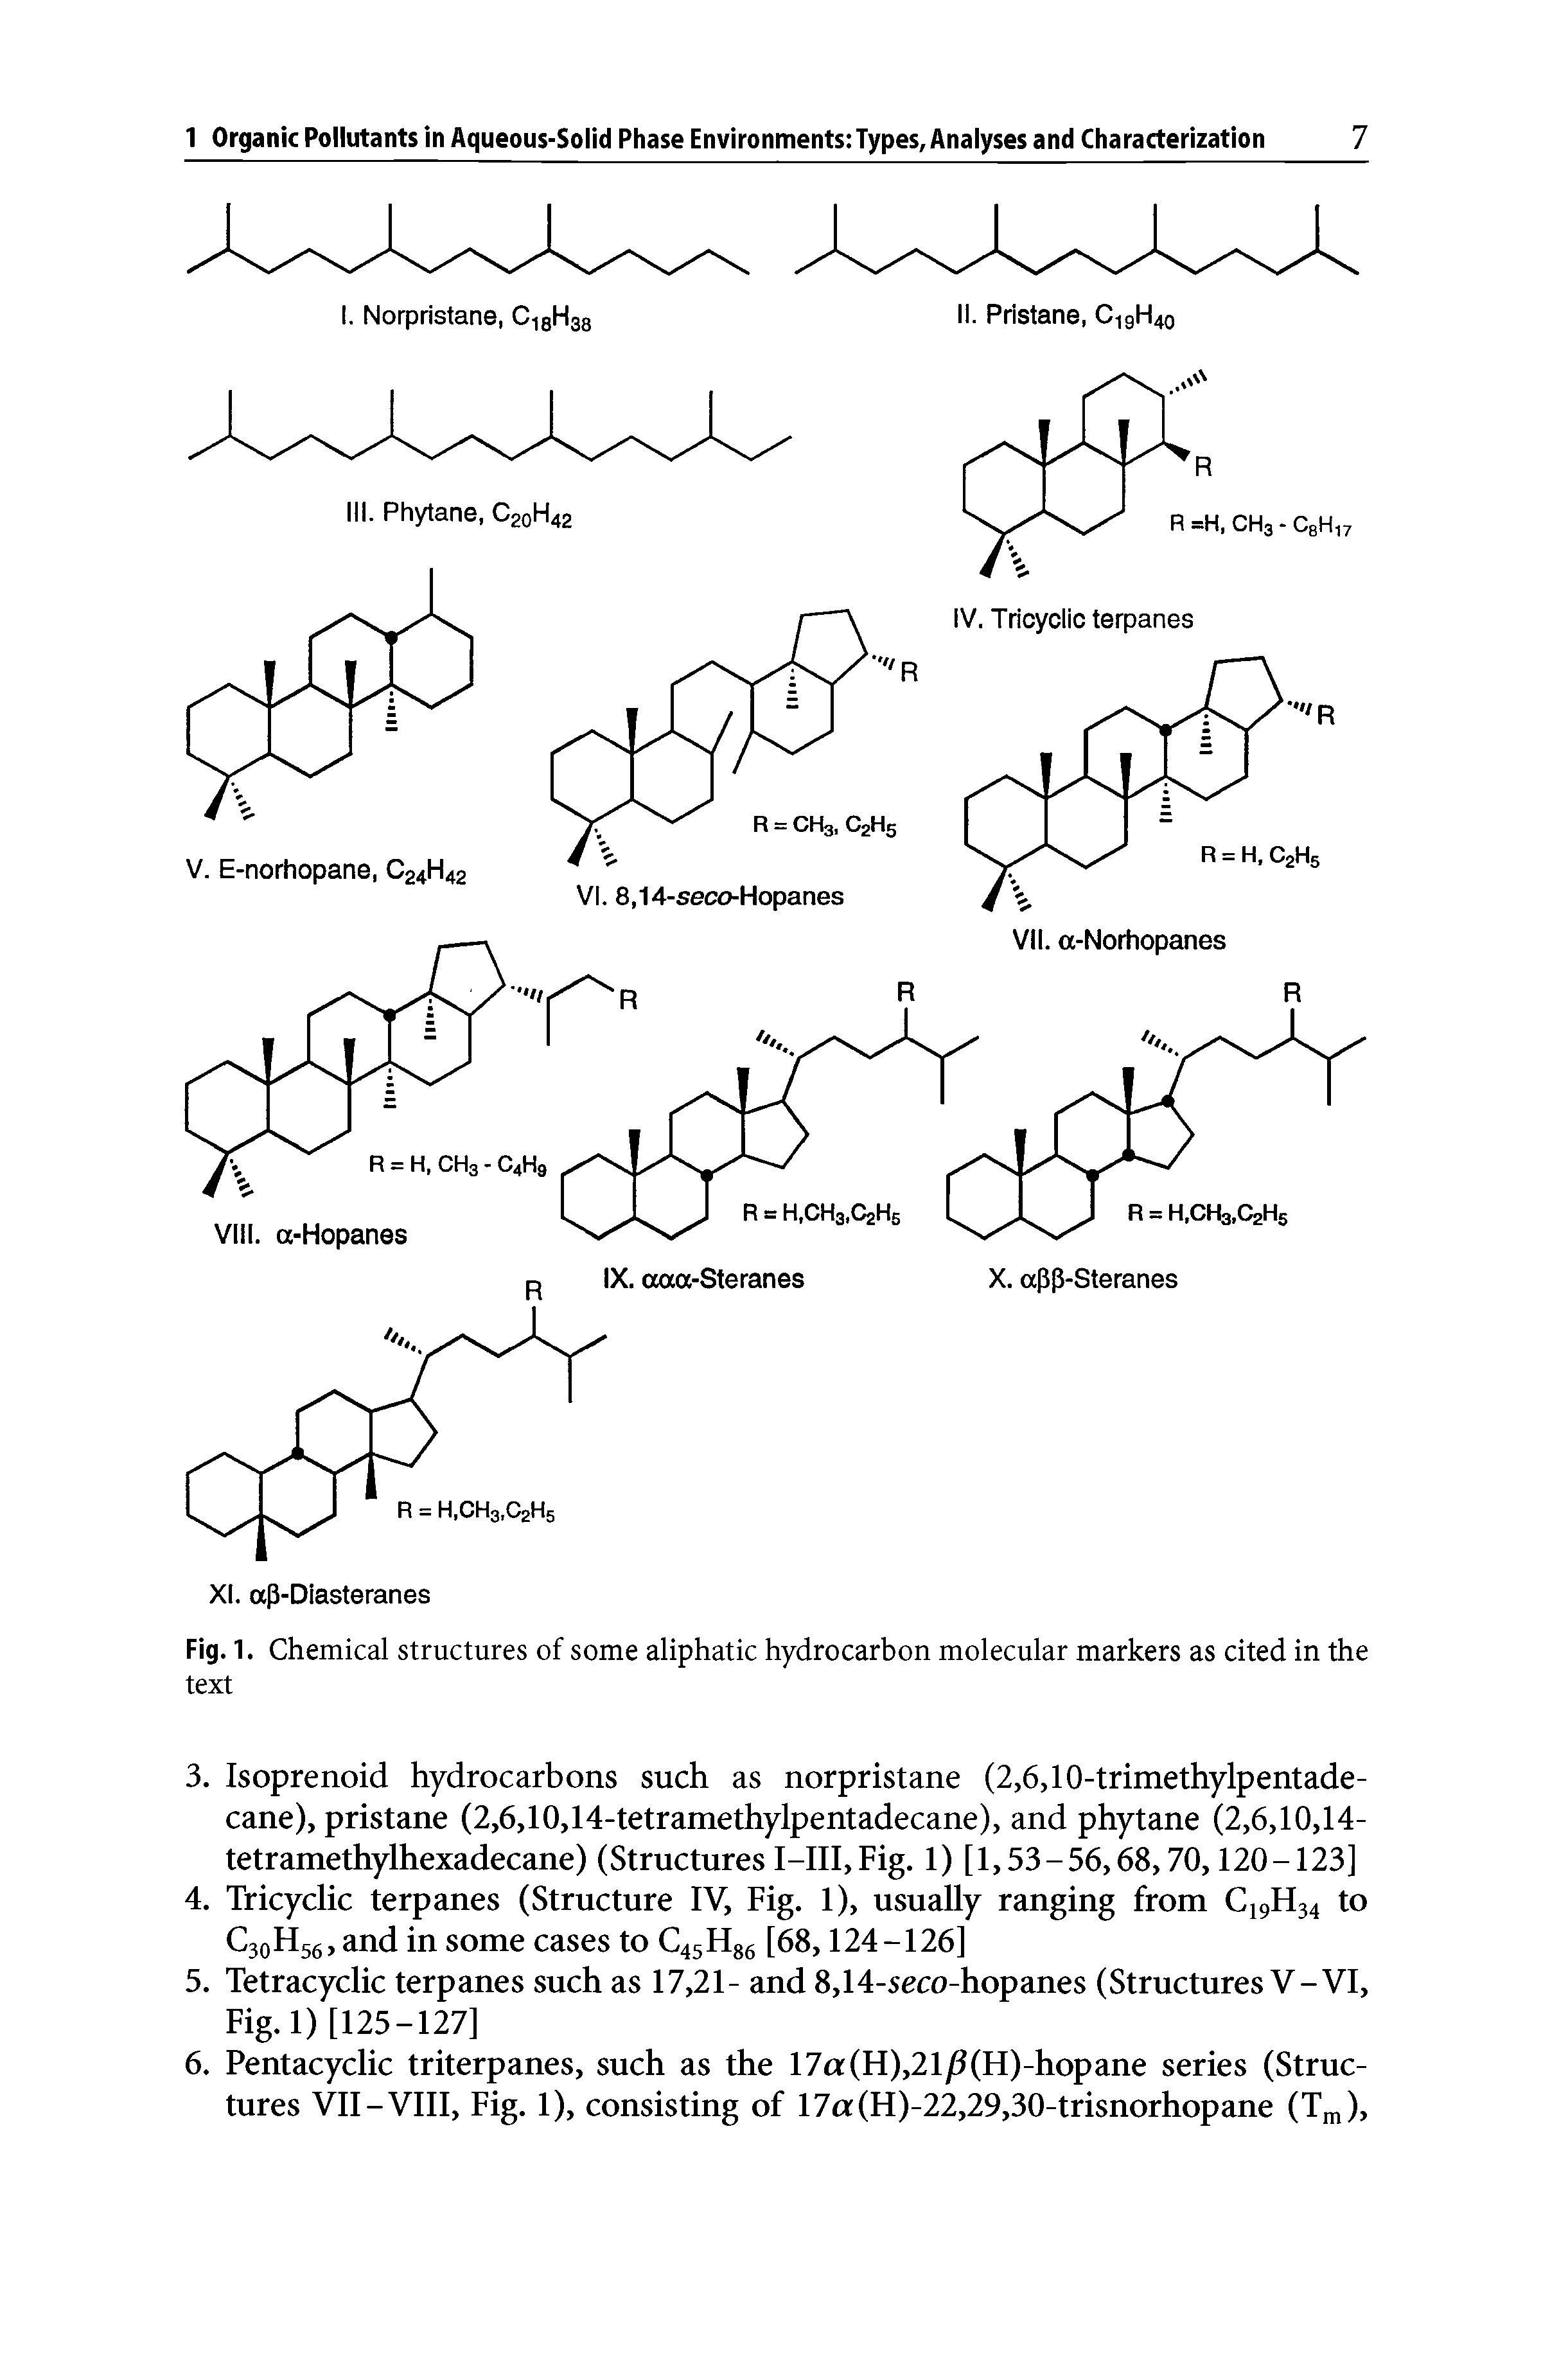 Fig. 1. Chemical structures of some aliphatic hydrocarbon molecular markers as cited in the text...